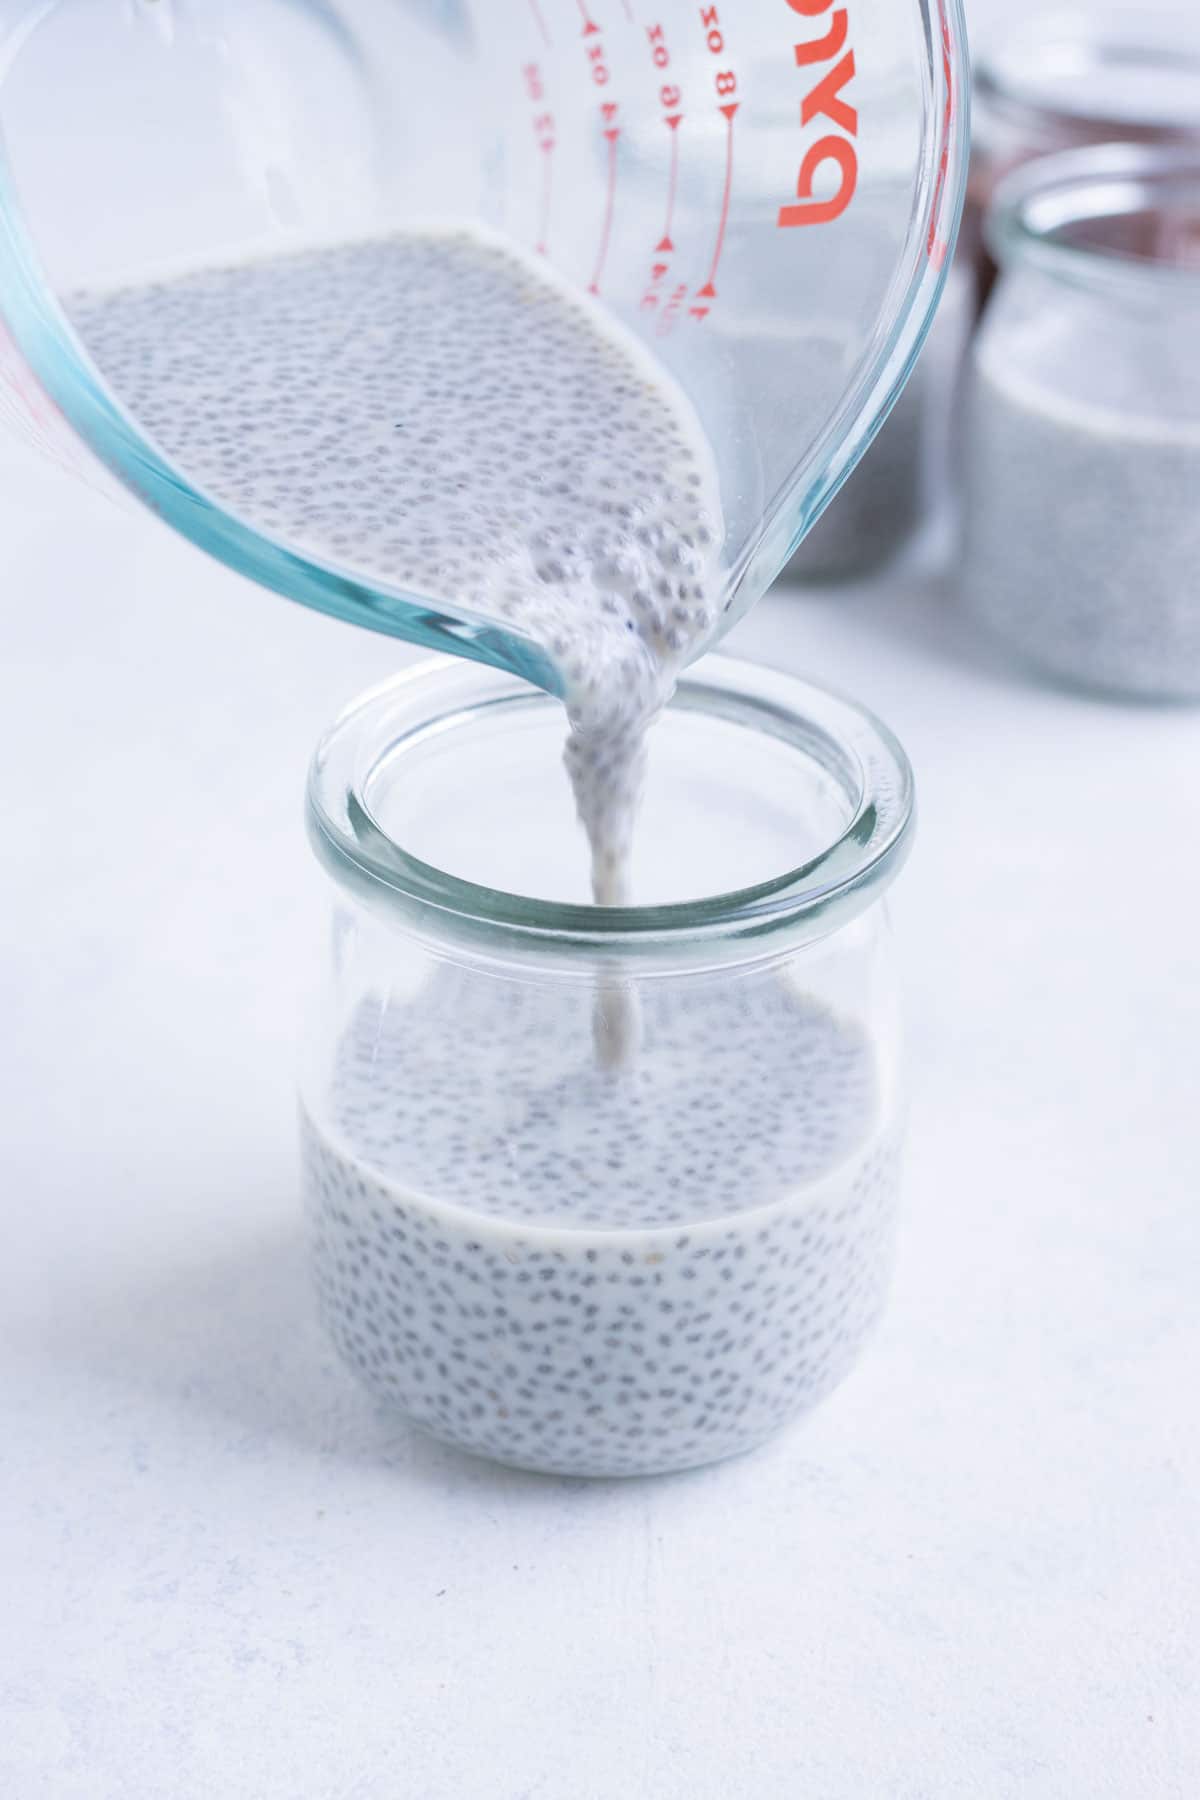 The chia seed pudding mixture is poured into 4 small mason jars.